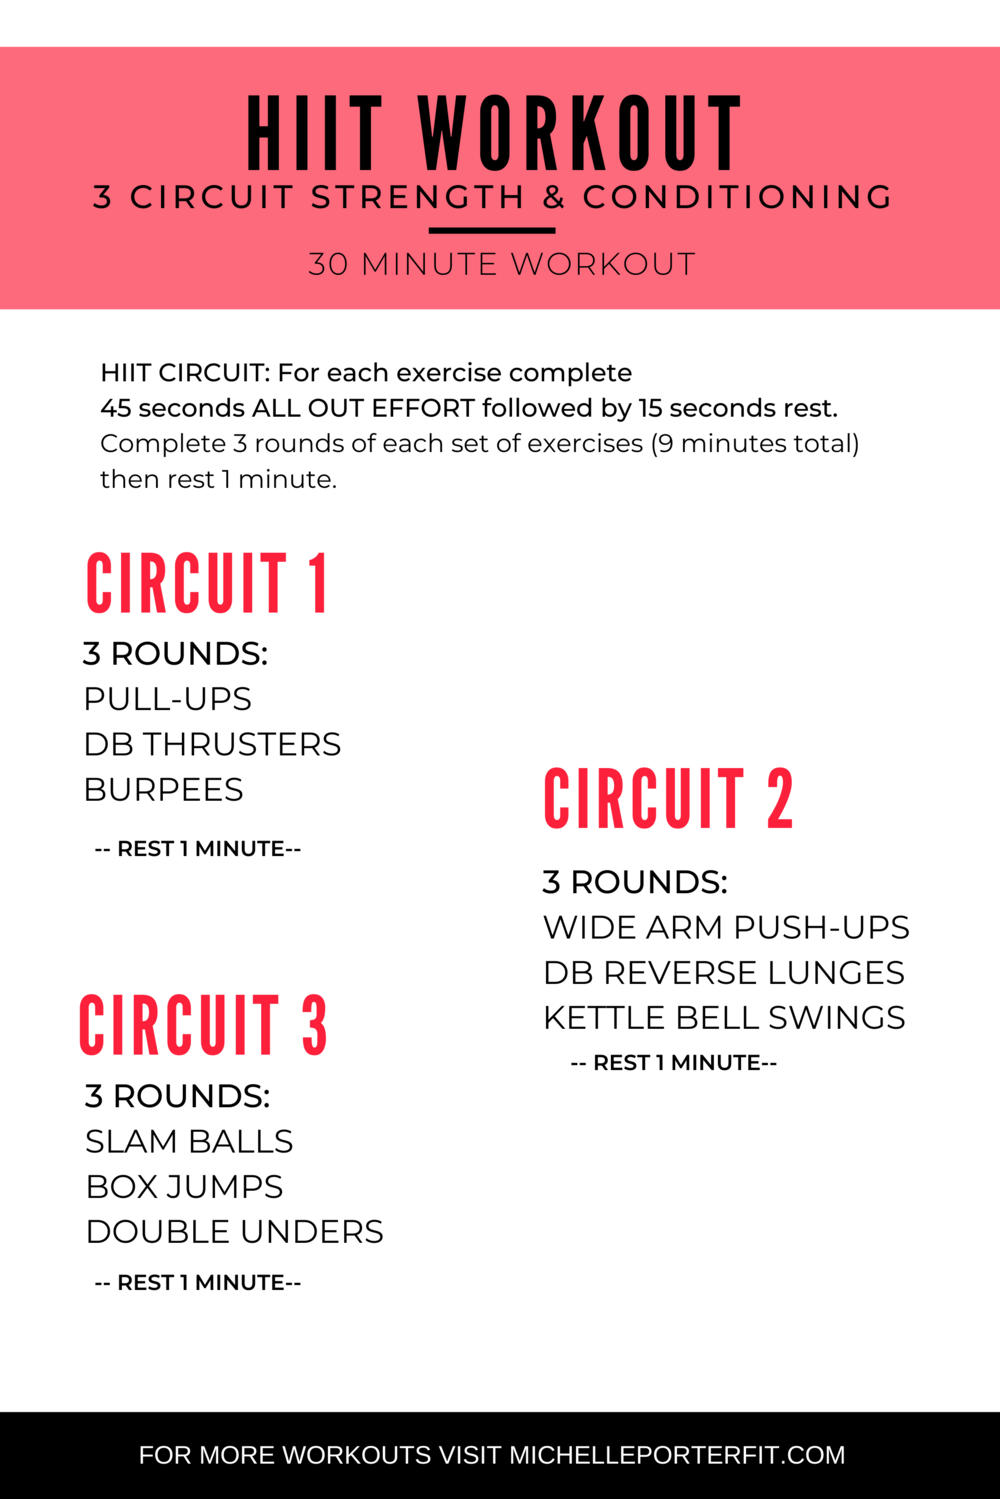 20 Minute Upper Body HIIT Workout for Strength and Conditioning